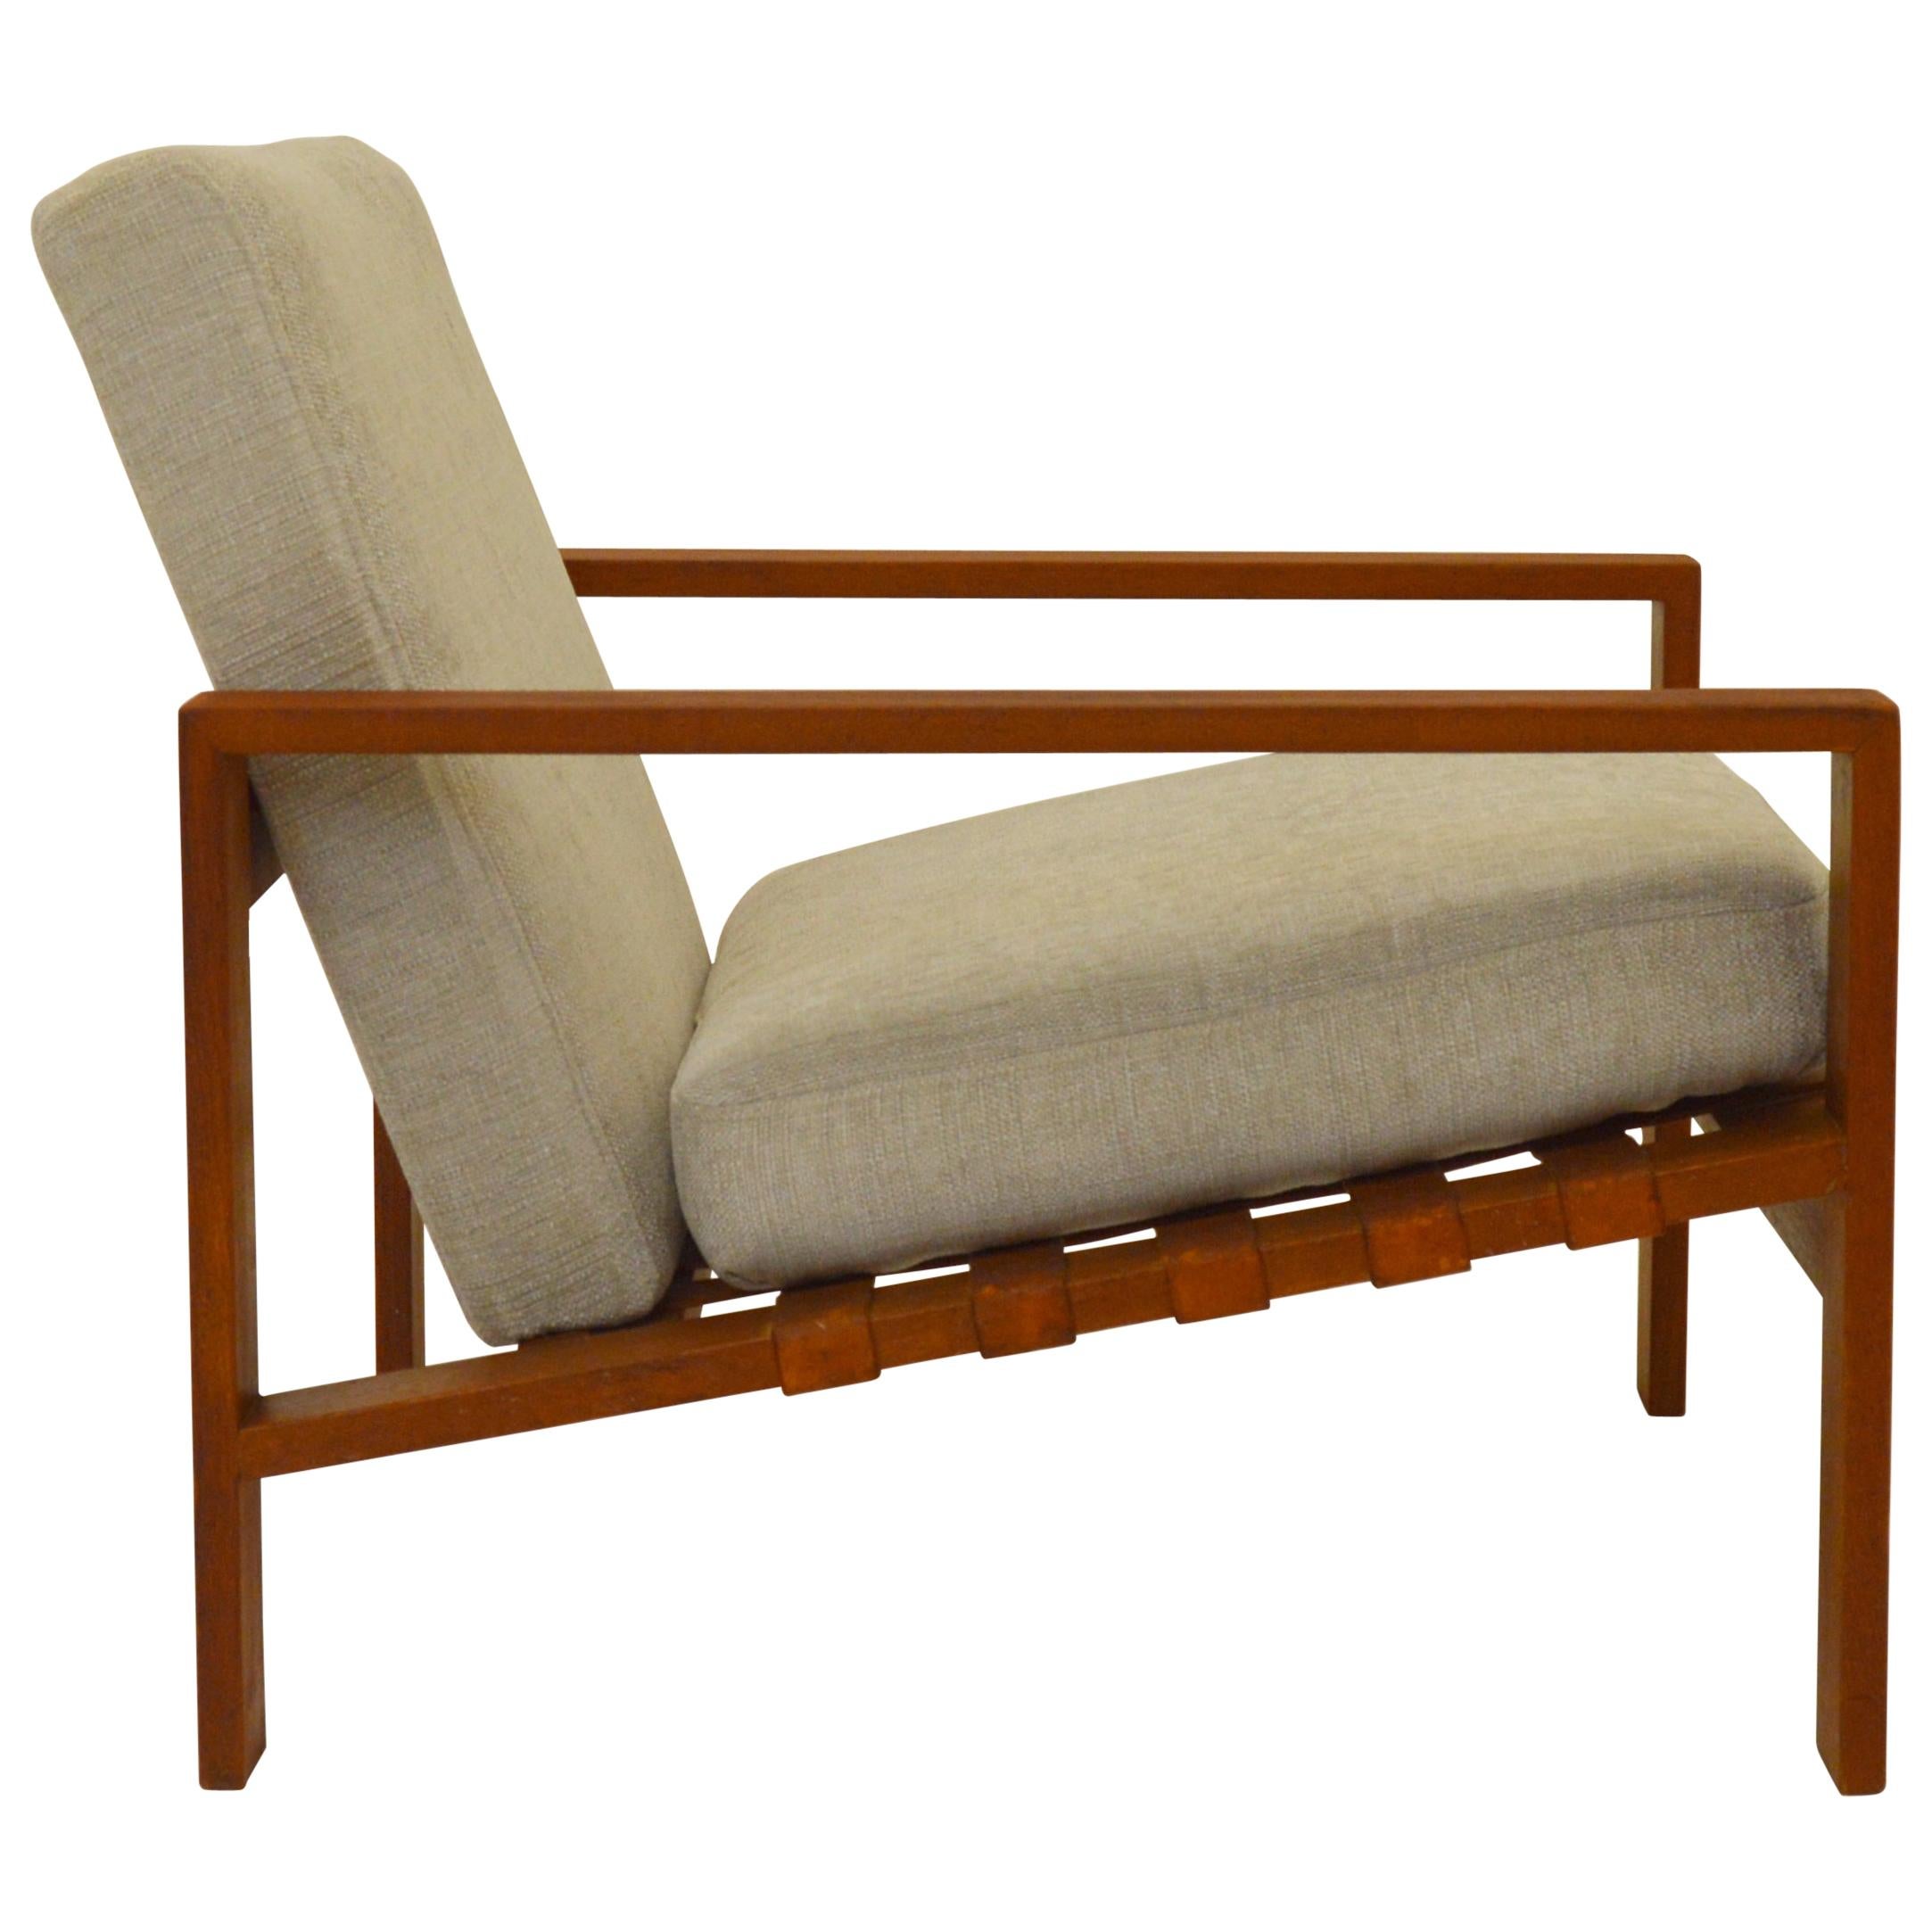 Midcentury Svante Skogh Easy Chair with Leather Webbing For Sale